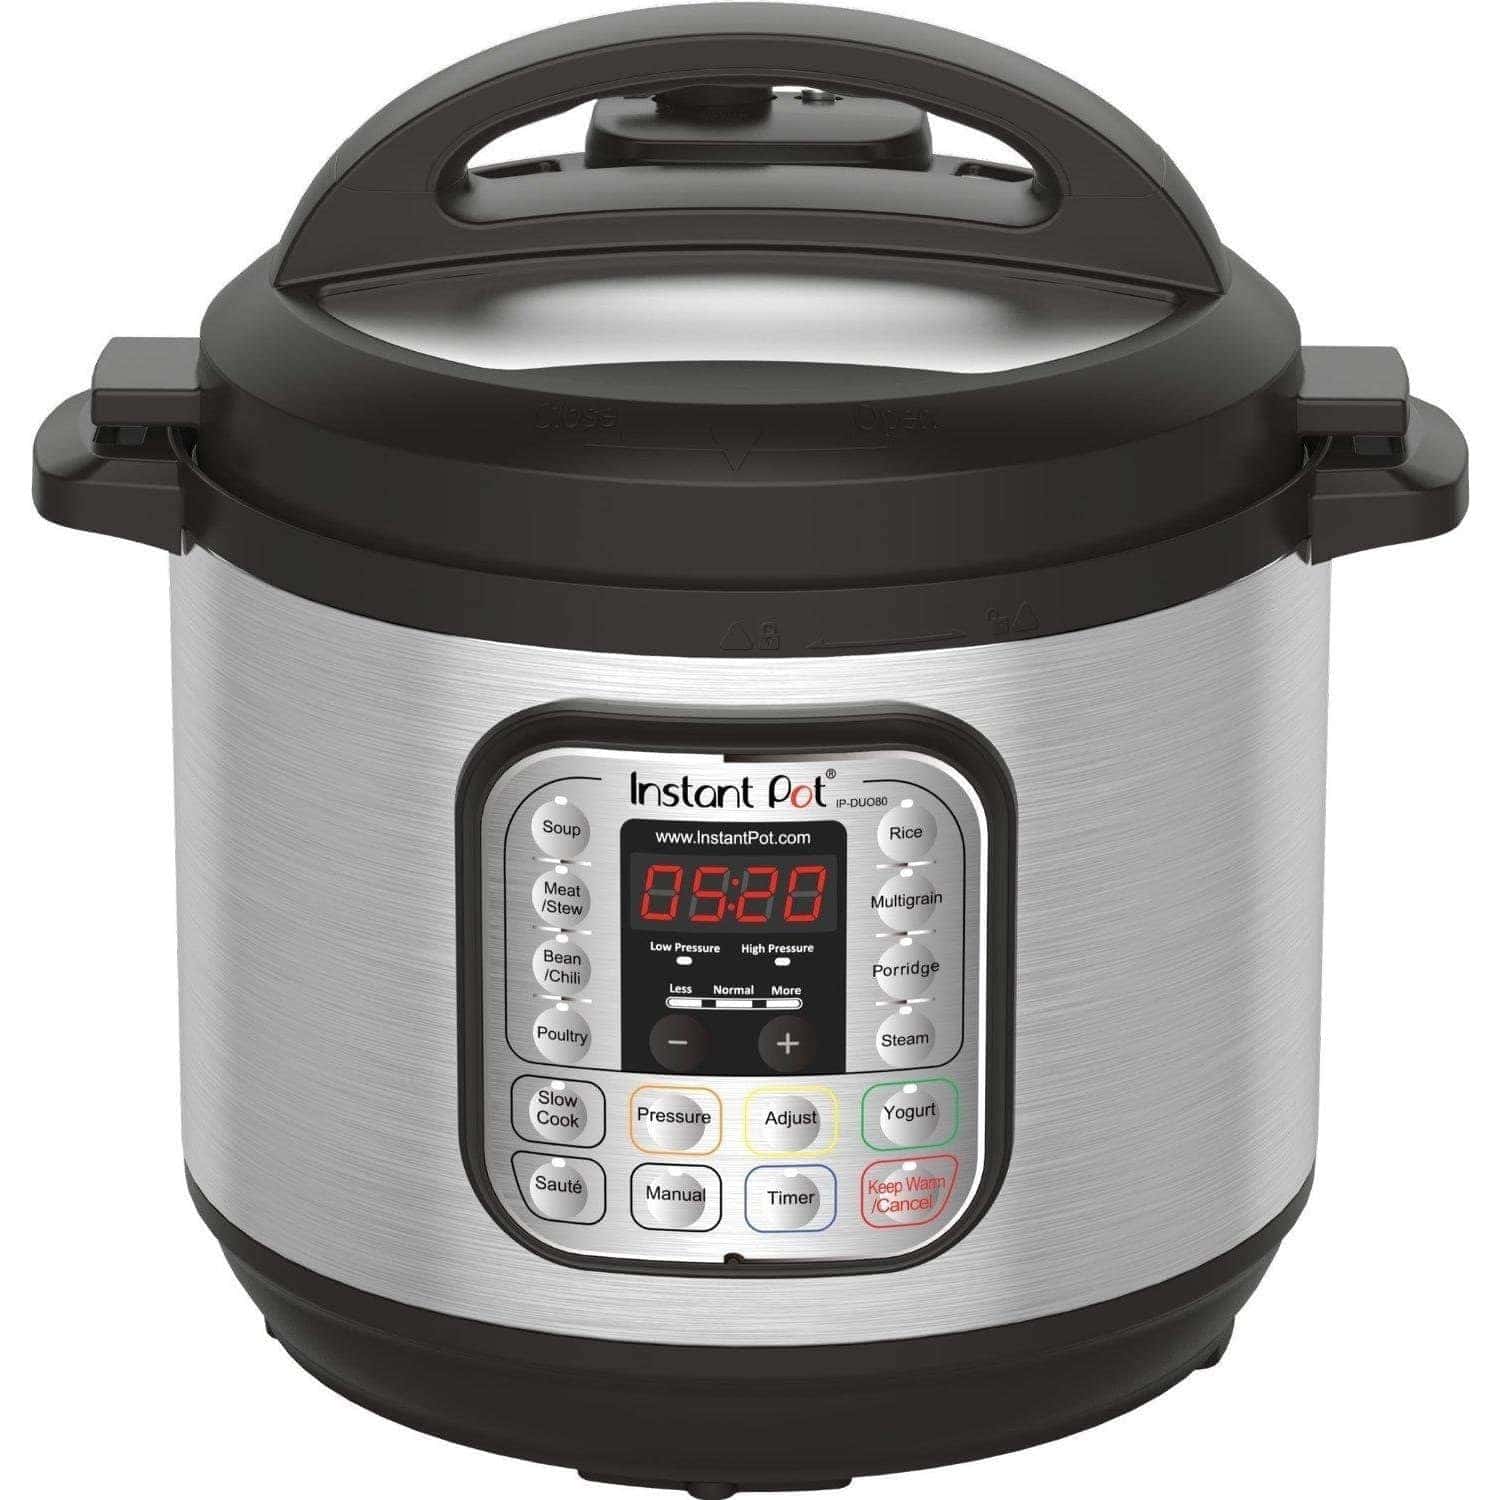 20 Simple Yet Effective Solutions for Instant Pot Problems